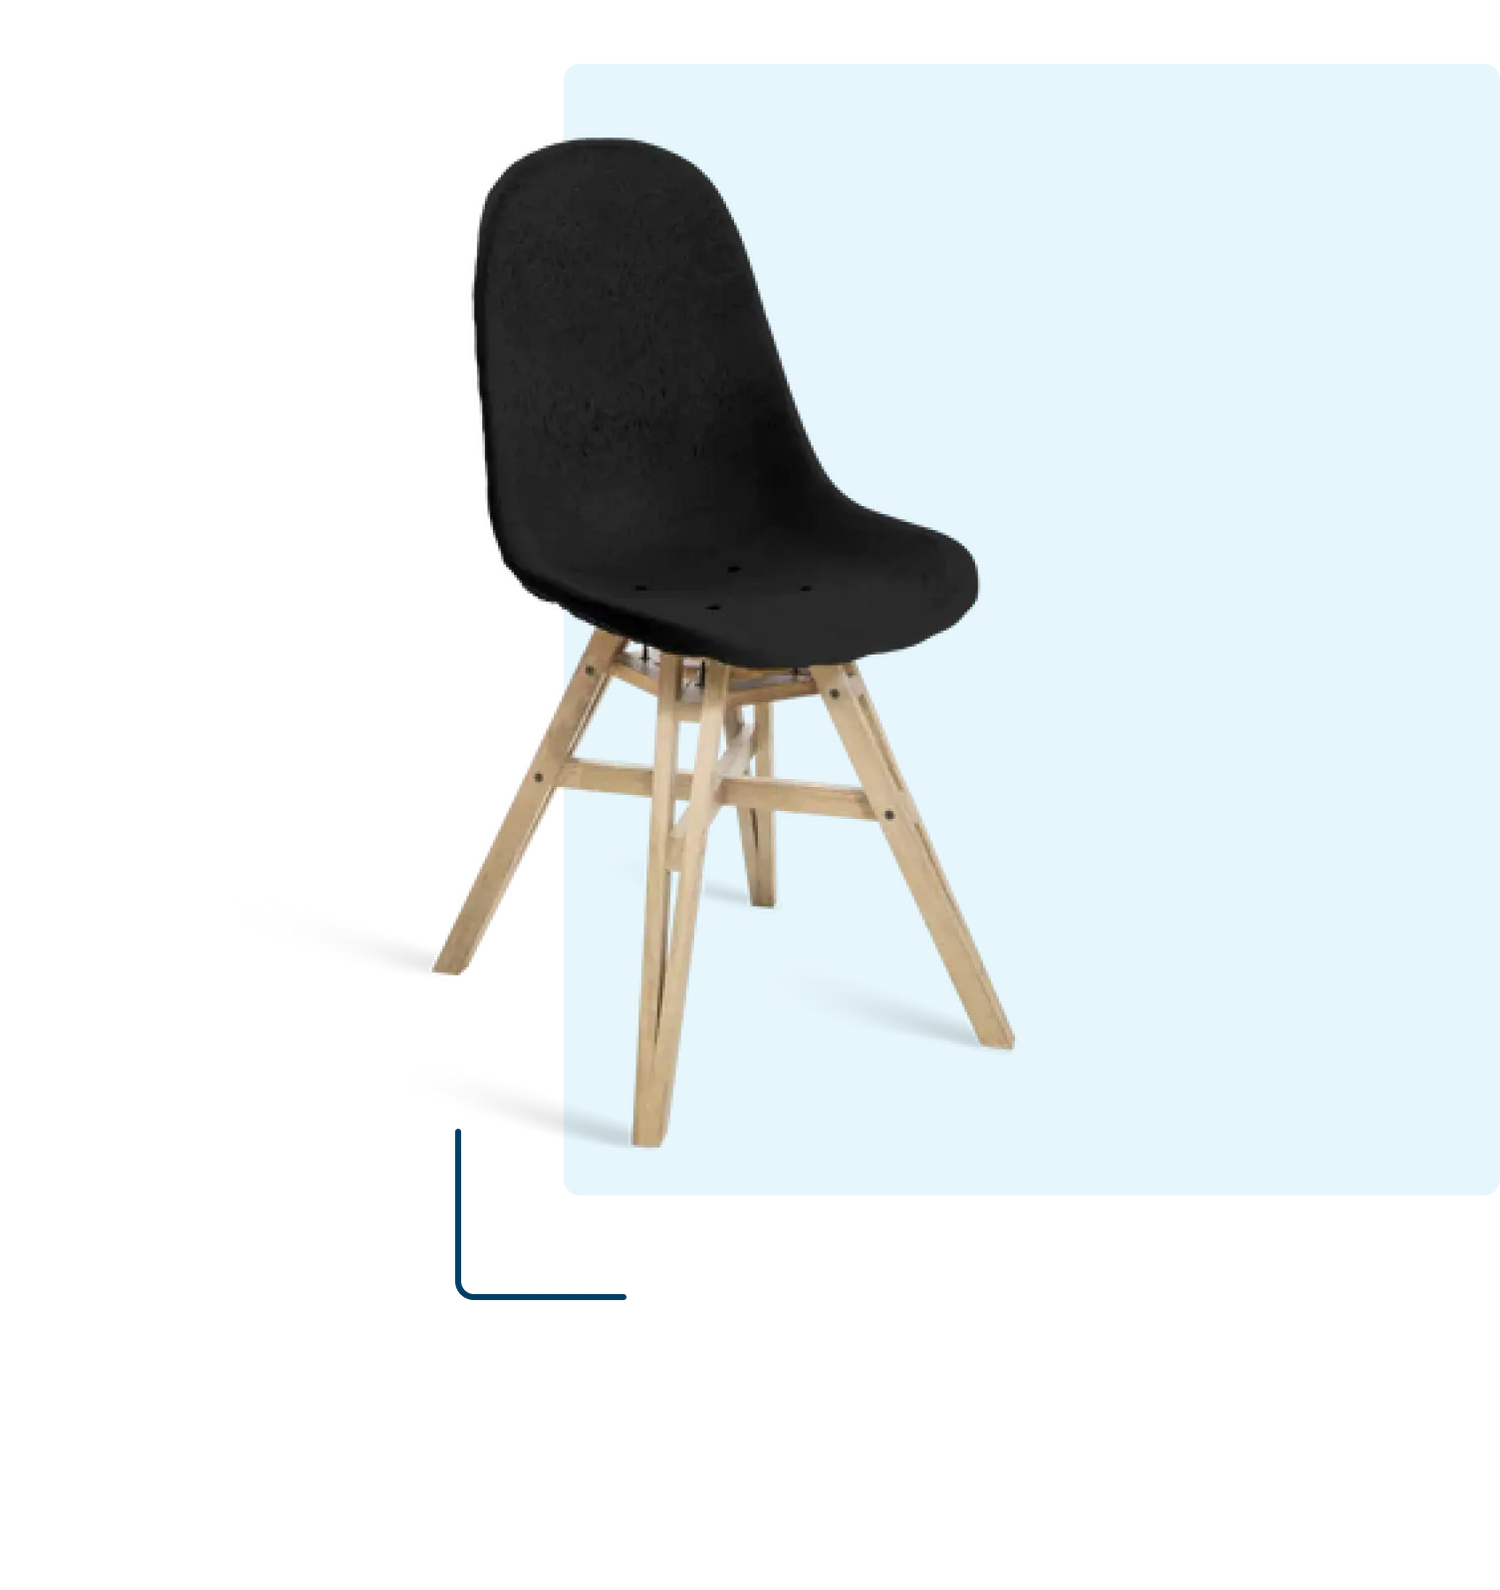 Le meilleur du mobilier neuf Made in France